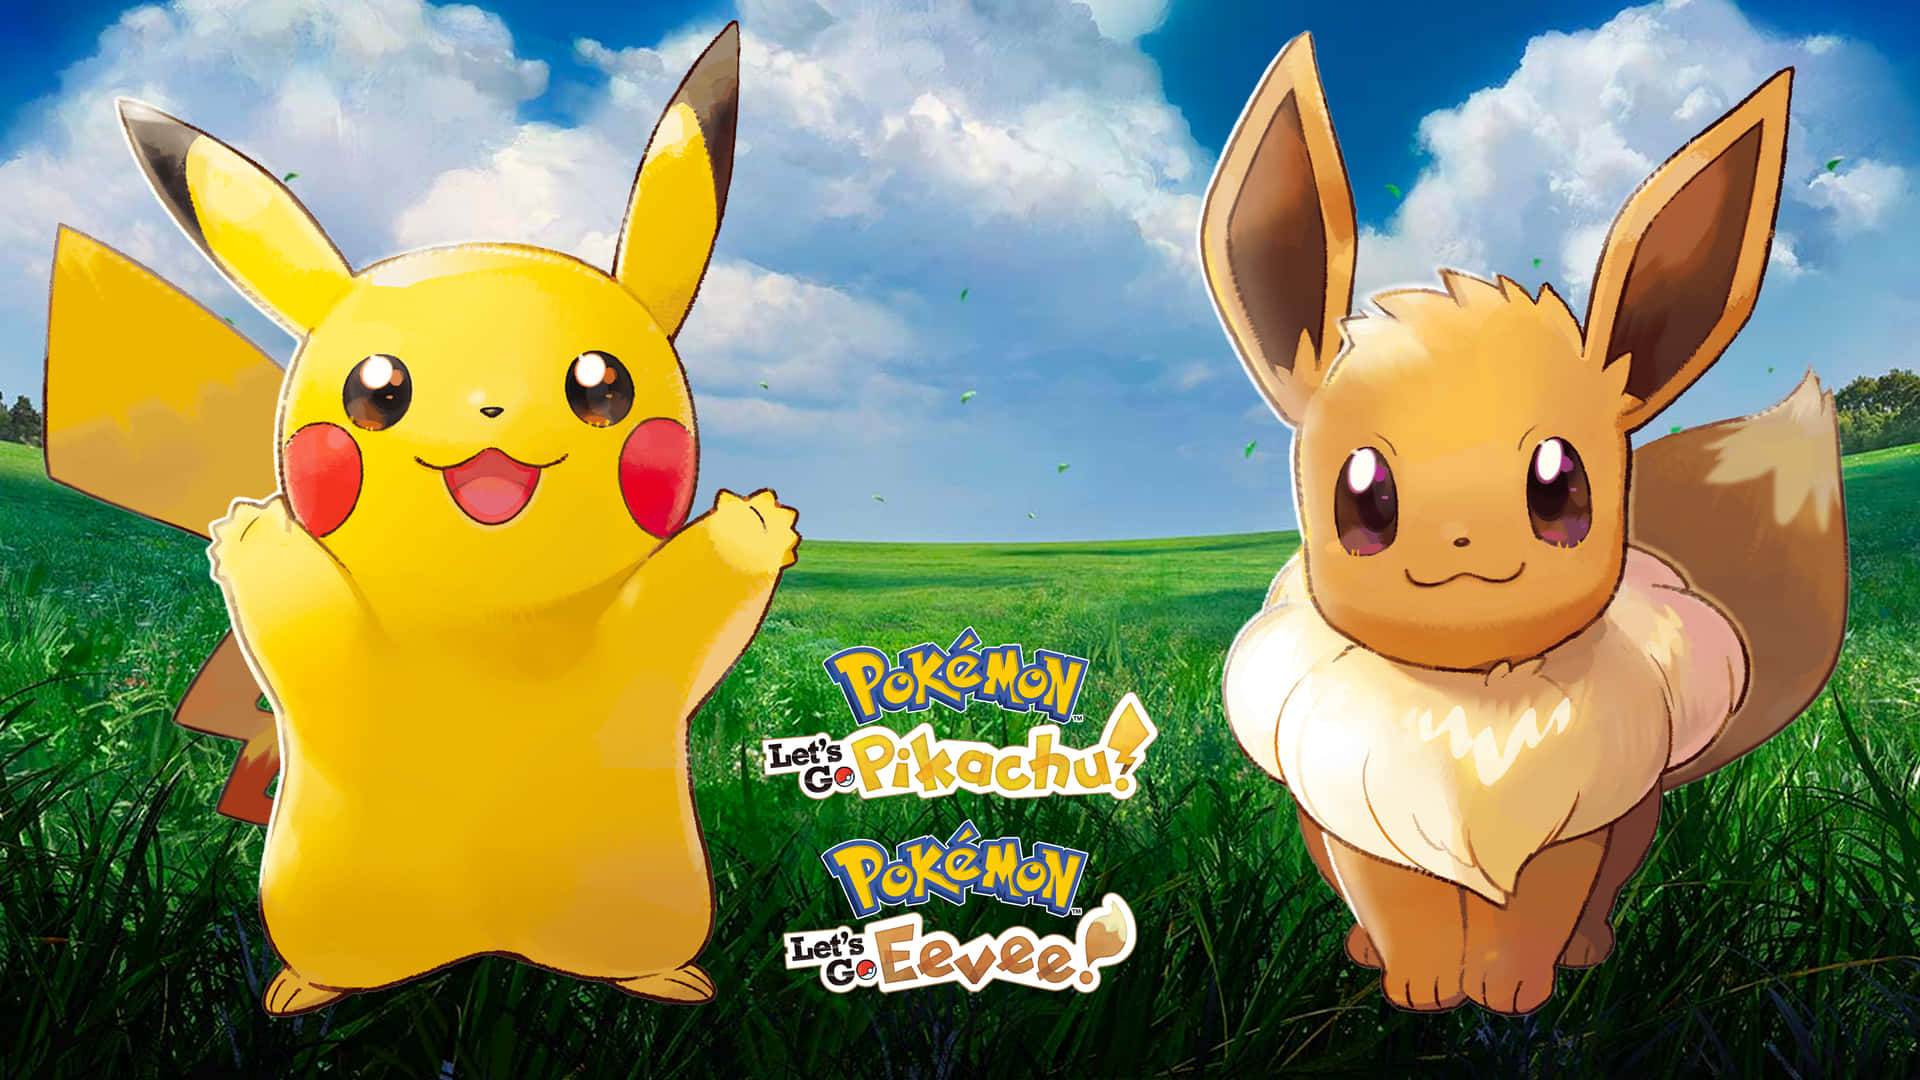 "Two of the most beloved Pokémon, Pikachu and Eevee, snuggled up together!" Wallpaper